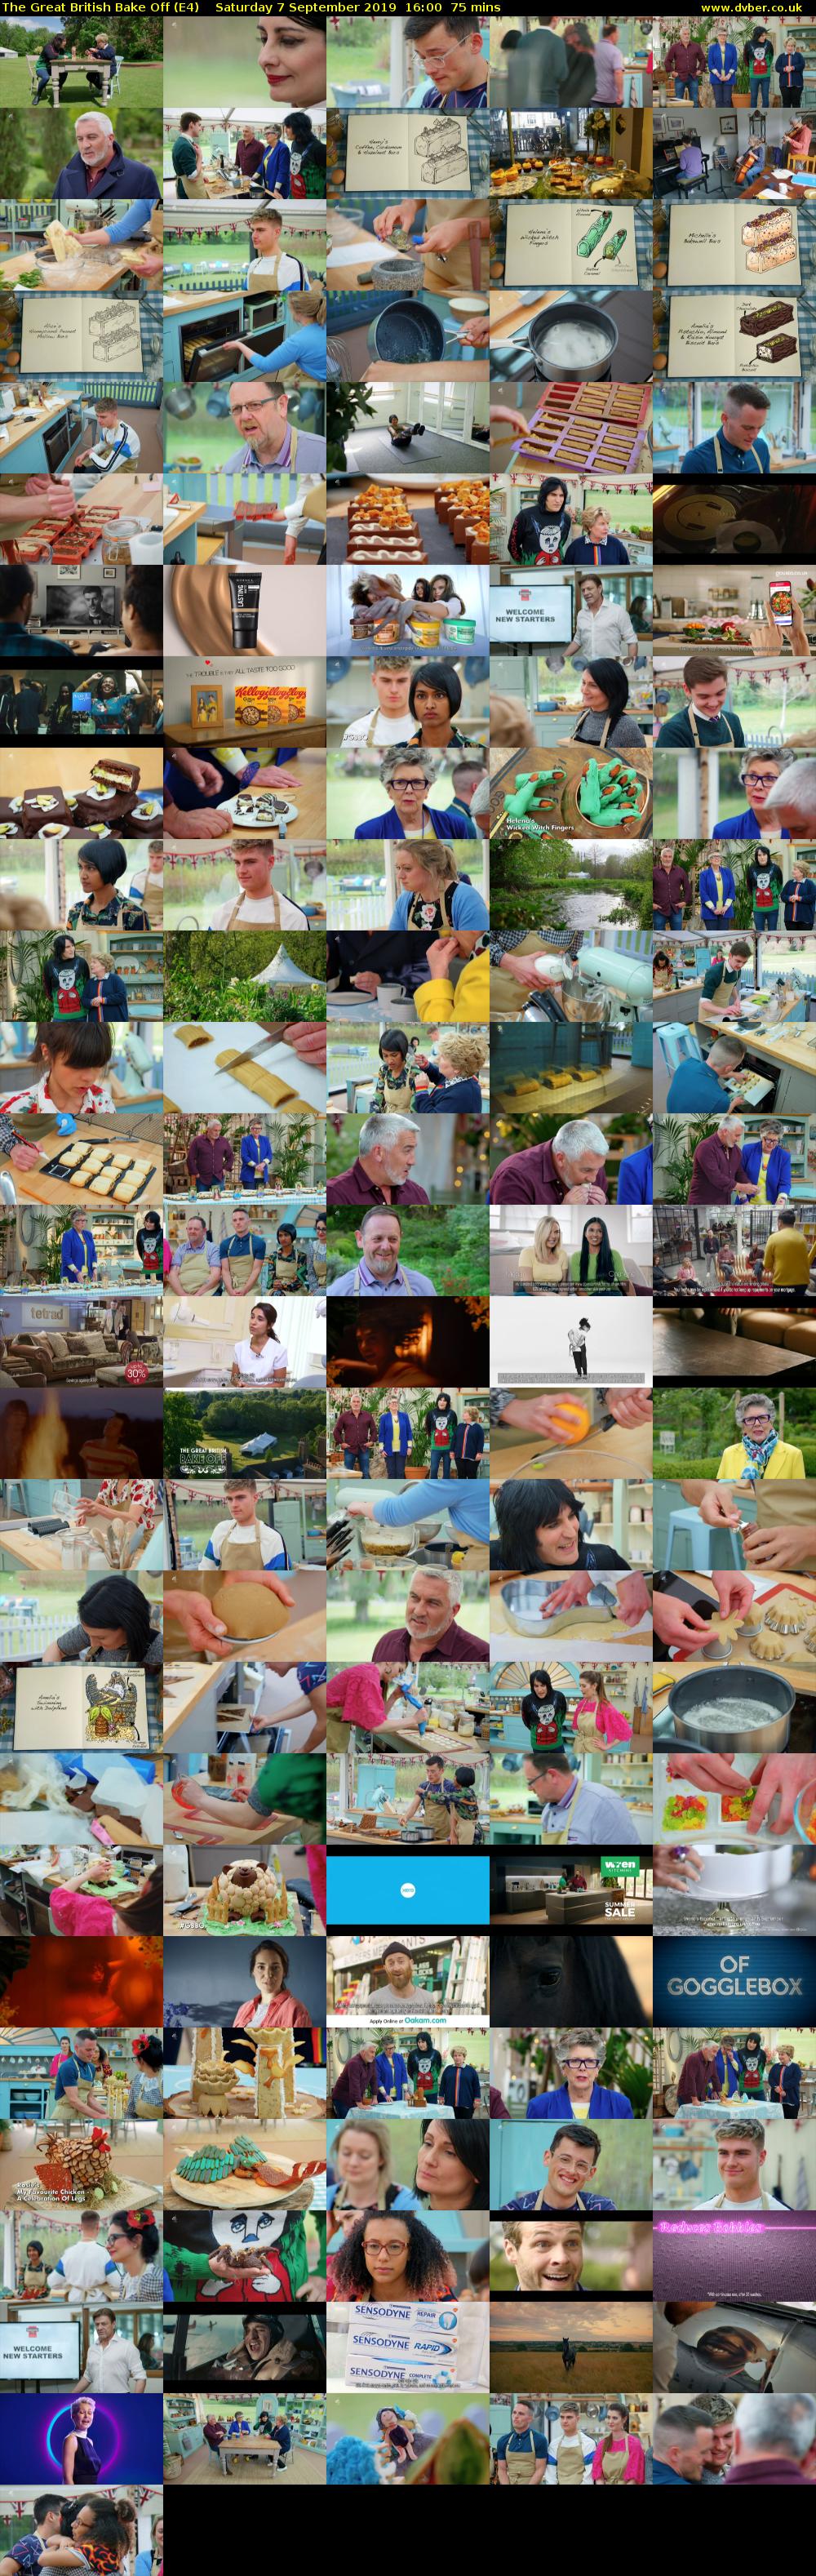 The Great British Bake Off (E4) Saturday 7 September 2019 16:00 - 17:15